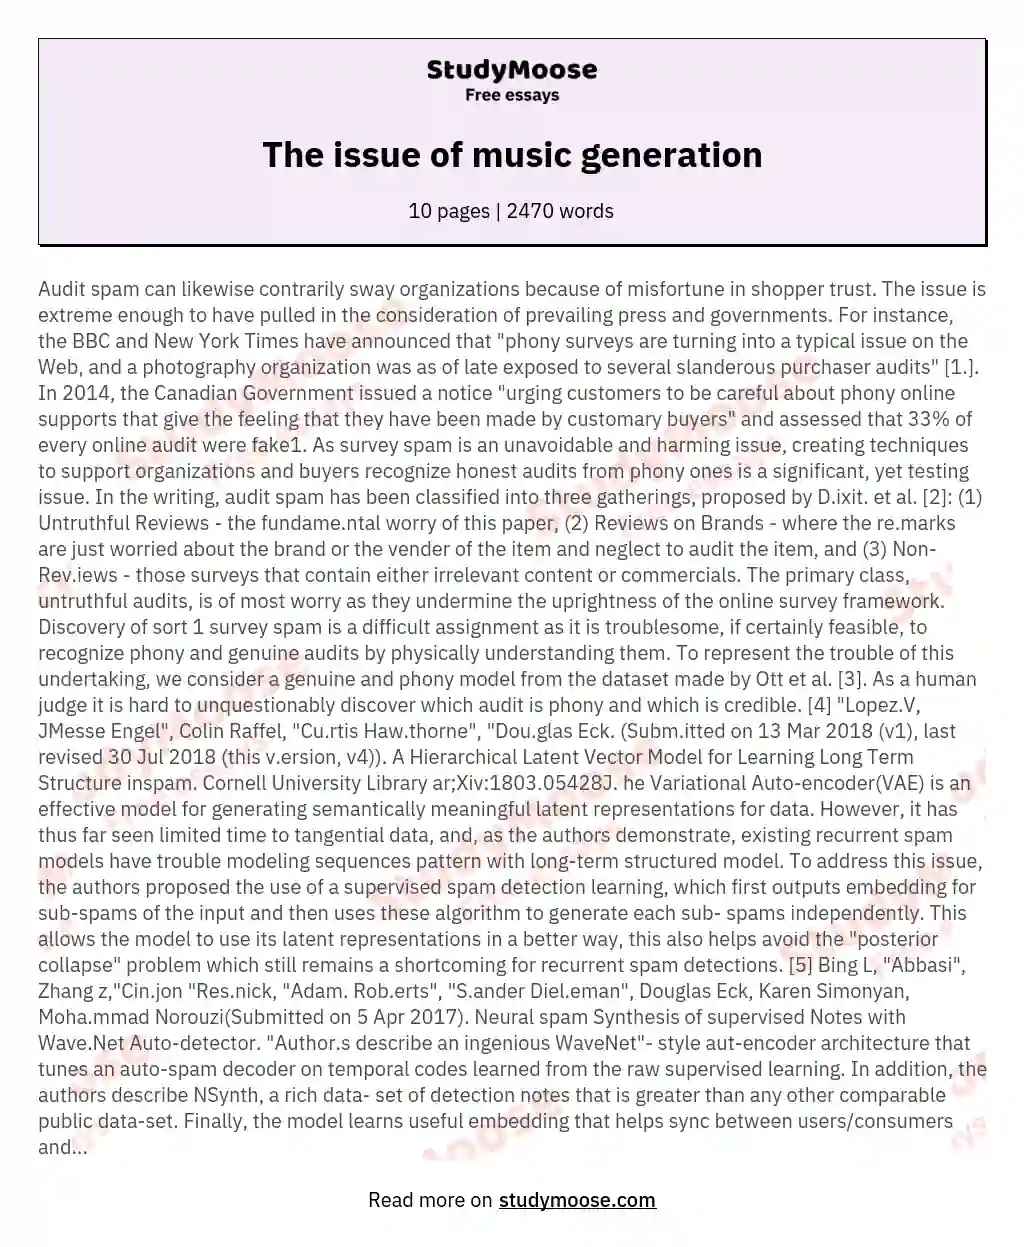 The issue of music generation essay